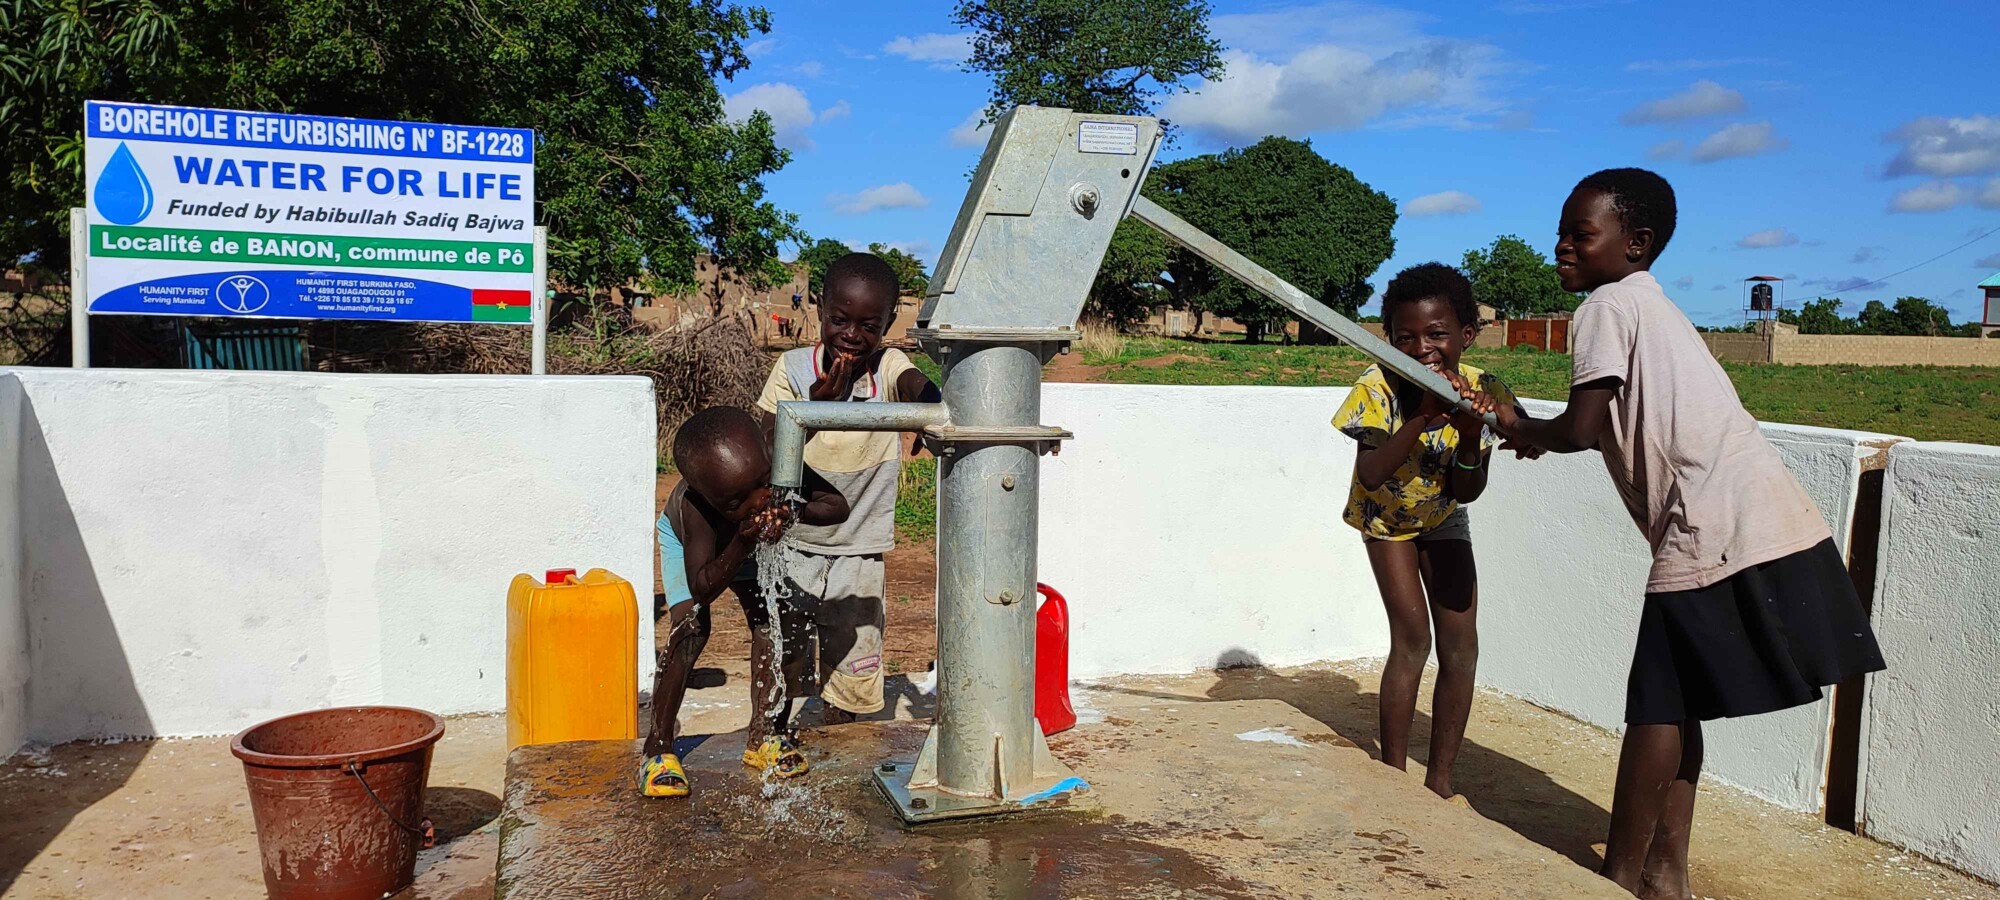 Four children laugh around a water hand pump as one pumps and another drinks from the water pouring from the spigot.